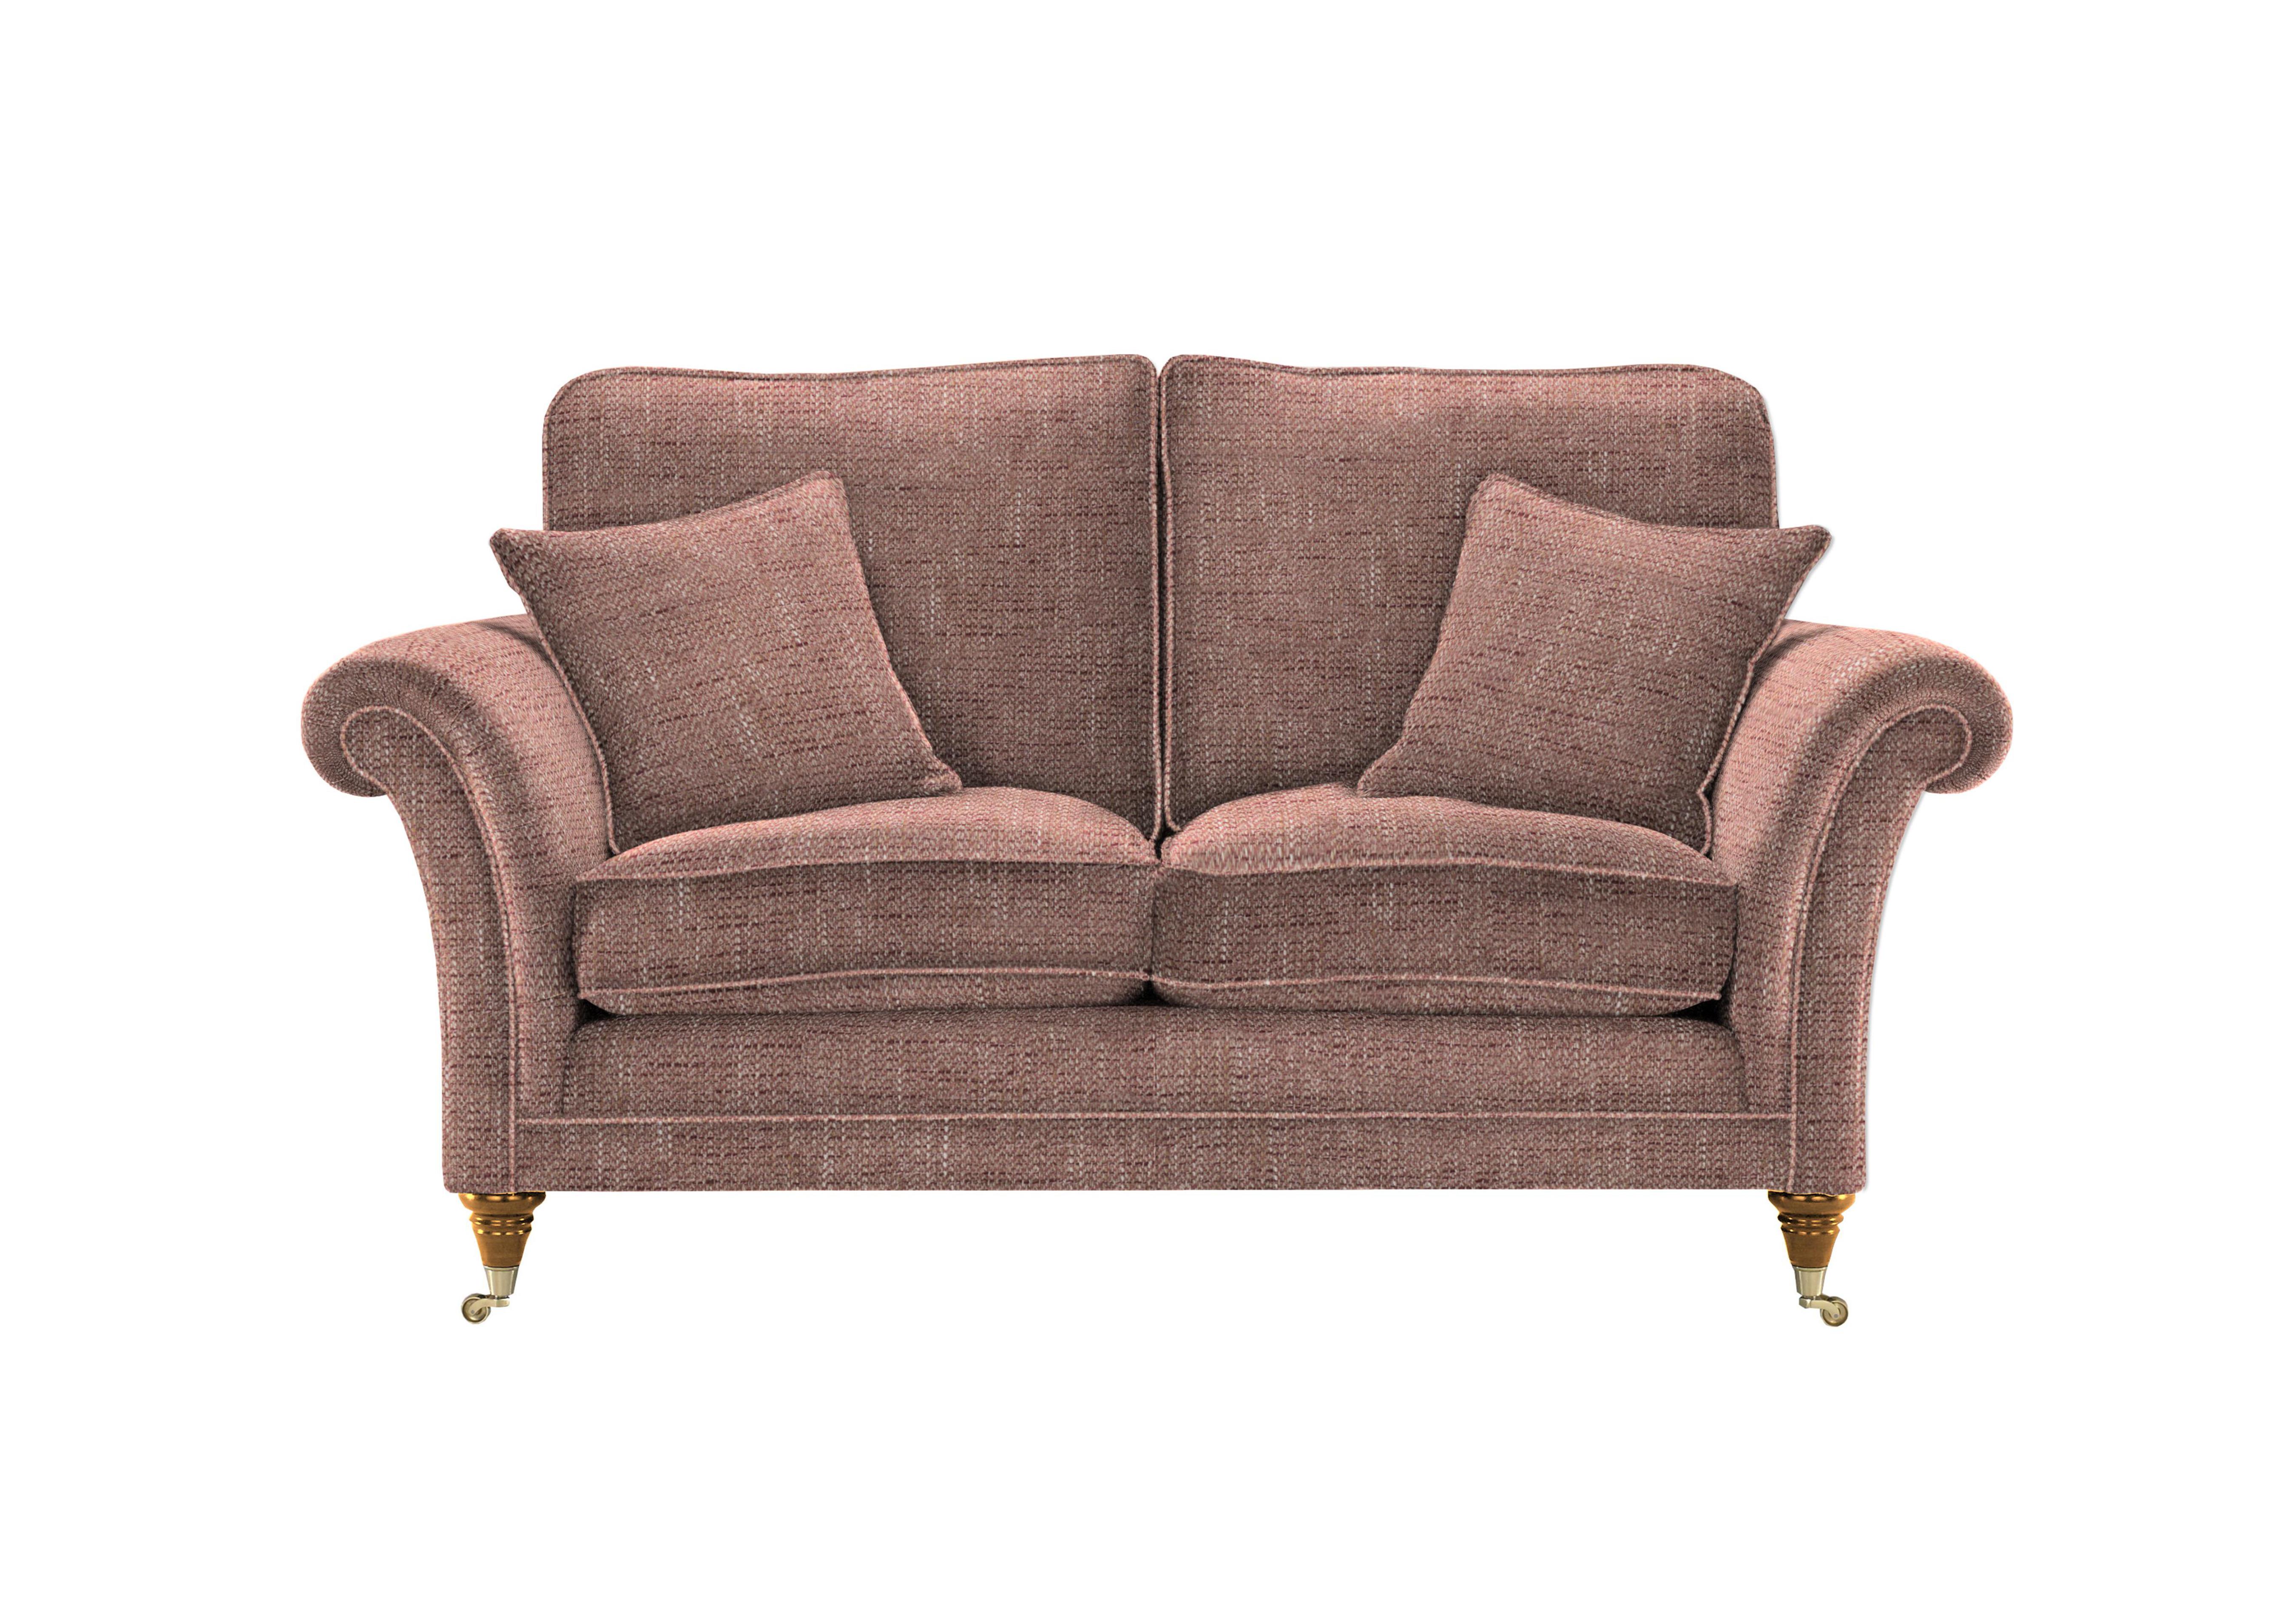 Burghley 2 Seater Fabric Sofa in 001408-0003 Country Rose on Furniture Village